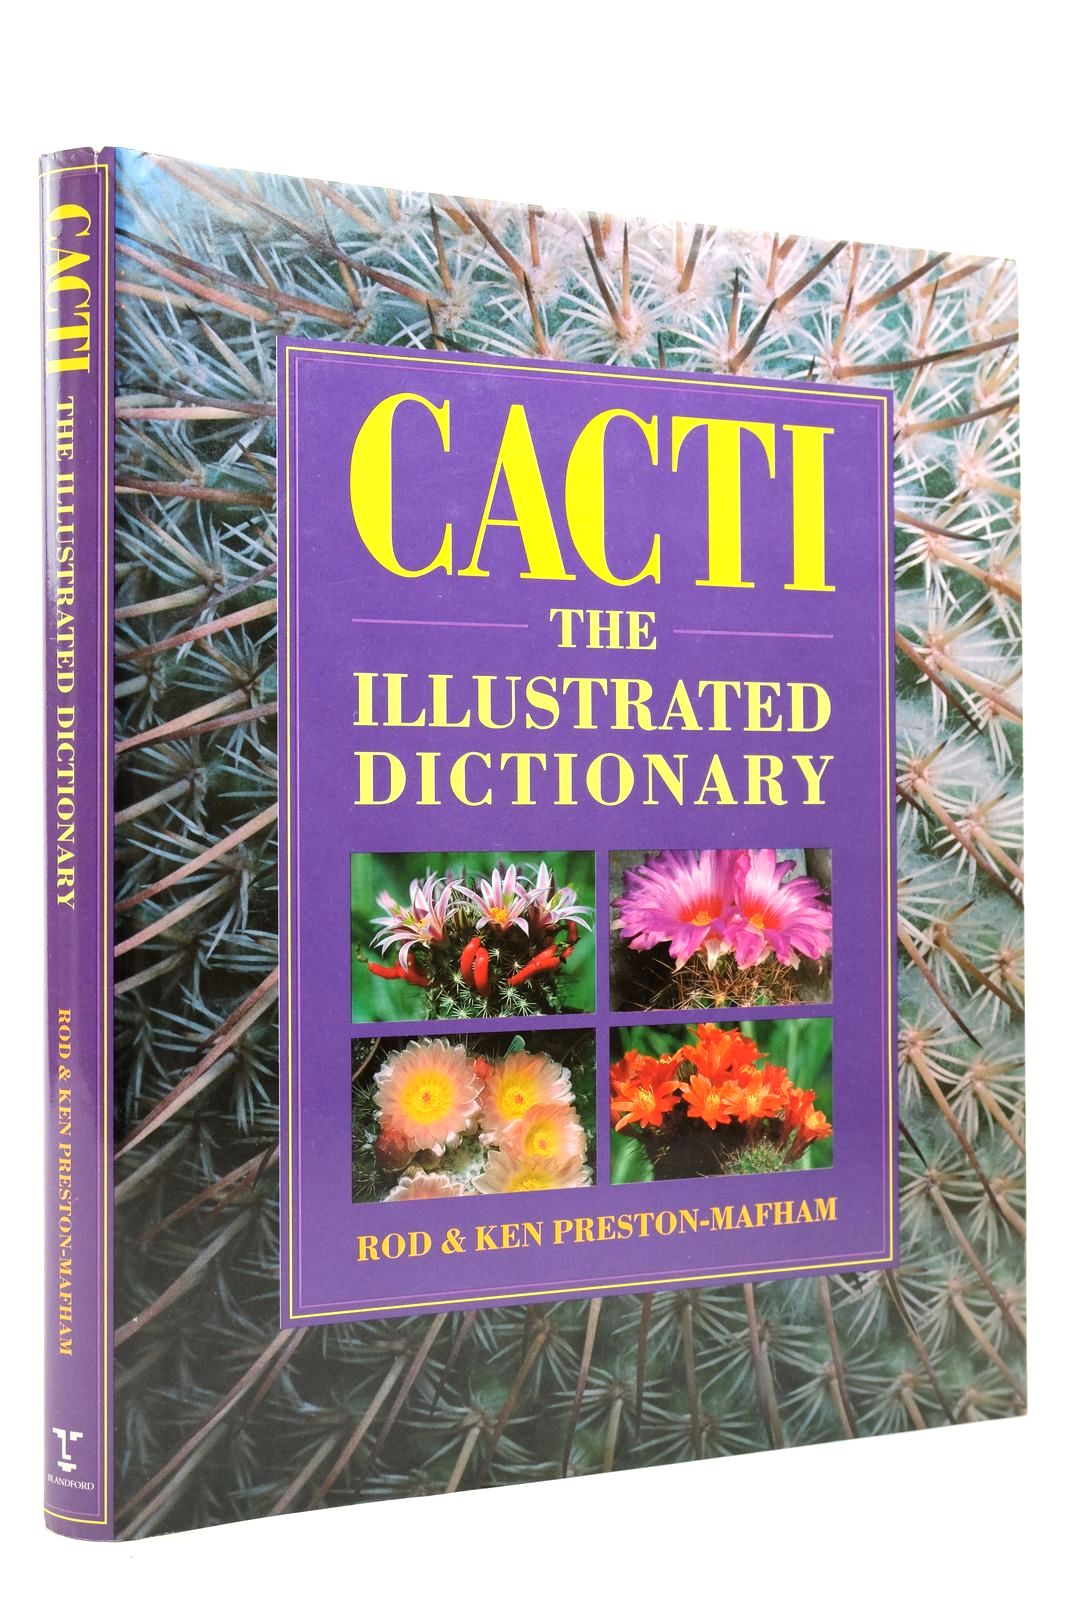 Photo of CACTI: THE ILLUSTRATED DICTIONARY written by Preston-Mafham, Rod Preston-Mafham, Ken published by Blandford (STOCK CODE: 2139630)  for sale by Stella & Rose's Books